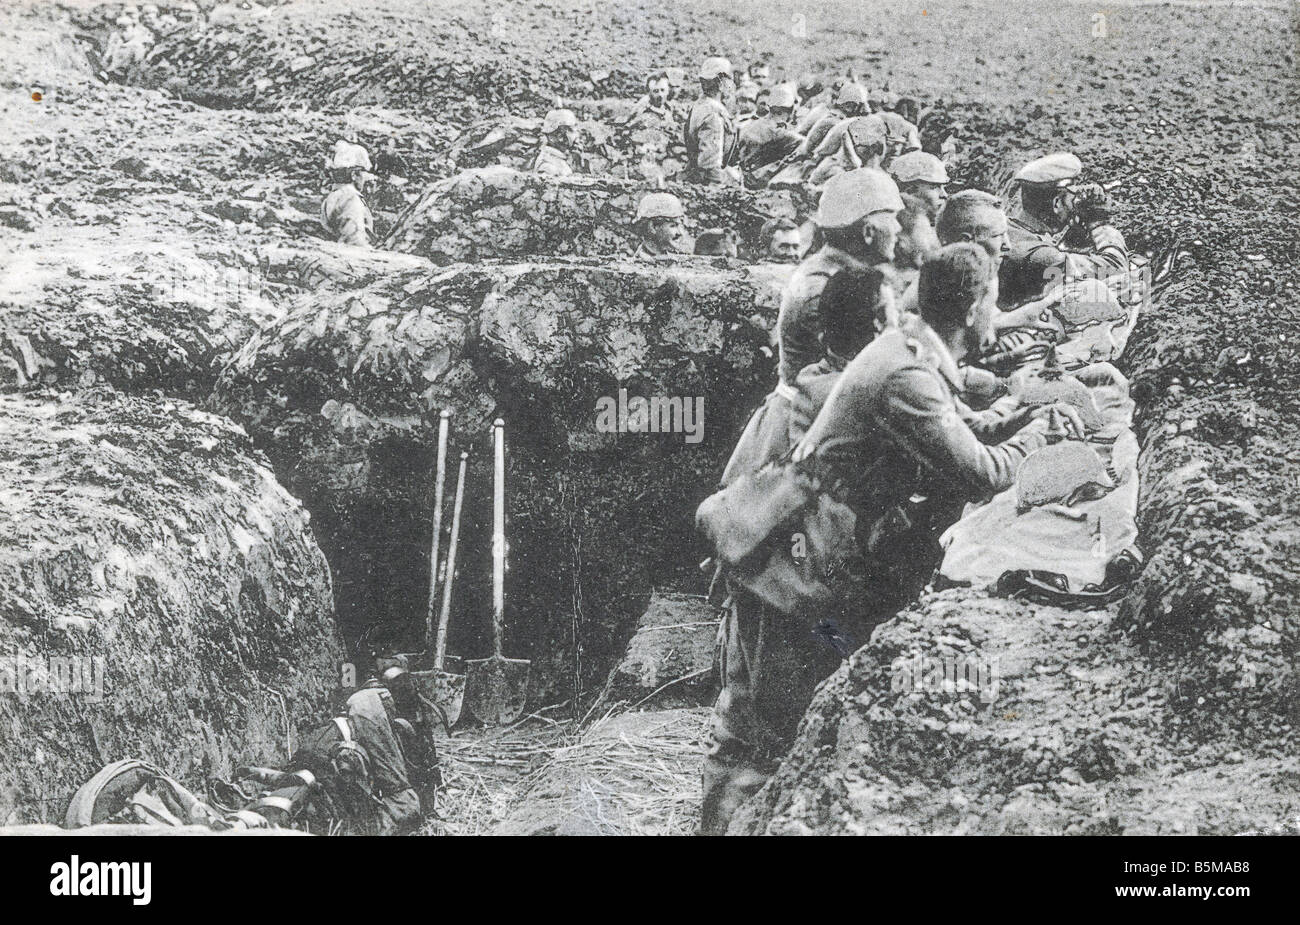 2 G55 W1 1916 13 WWI Observation post trench 1916 History WWI Western Front Trench Warfare German soldiers in a trench observing Stock Photo